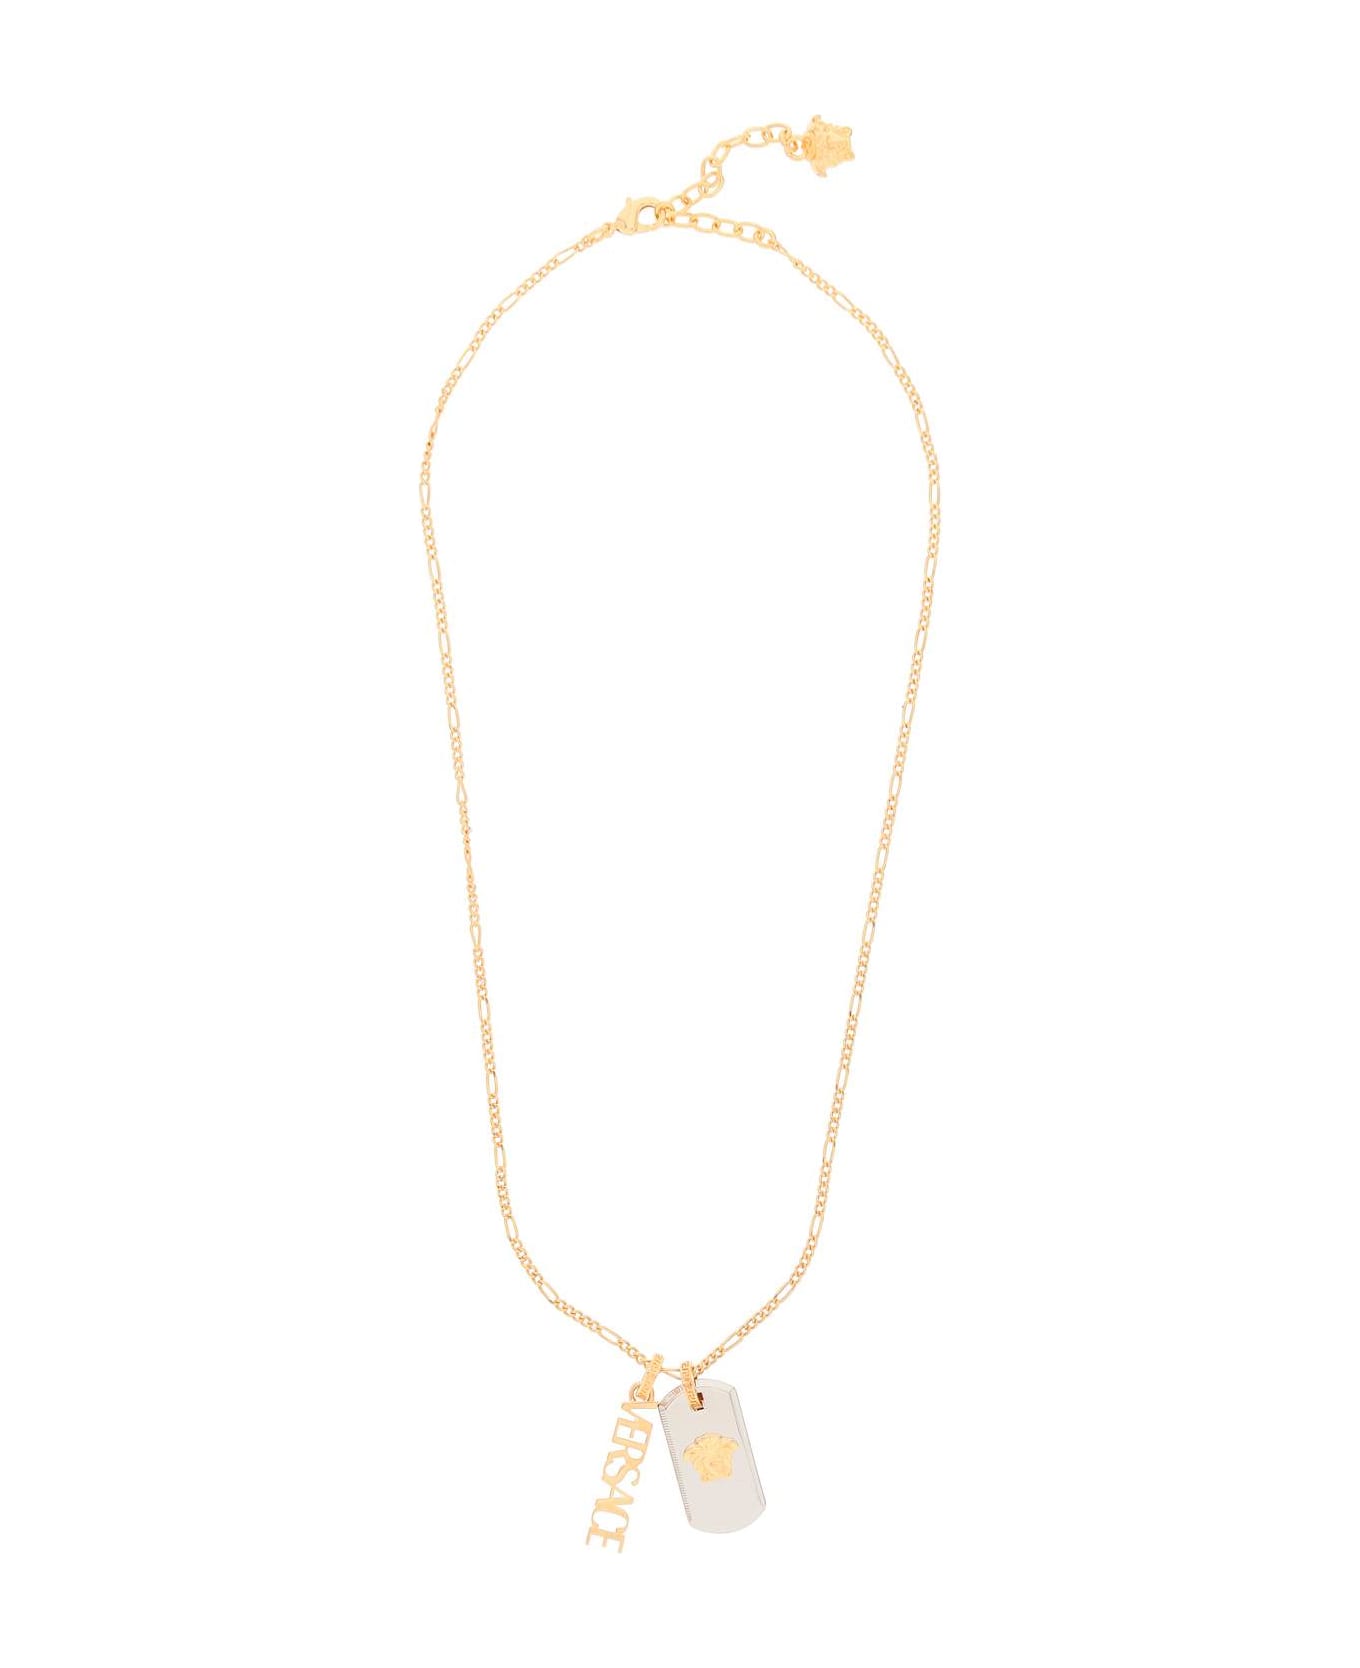 Versace Necklace With Charms - Versace Gold Palladium